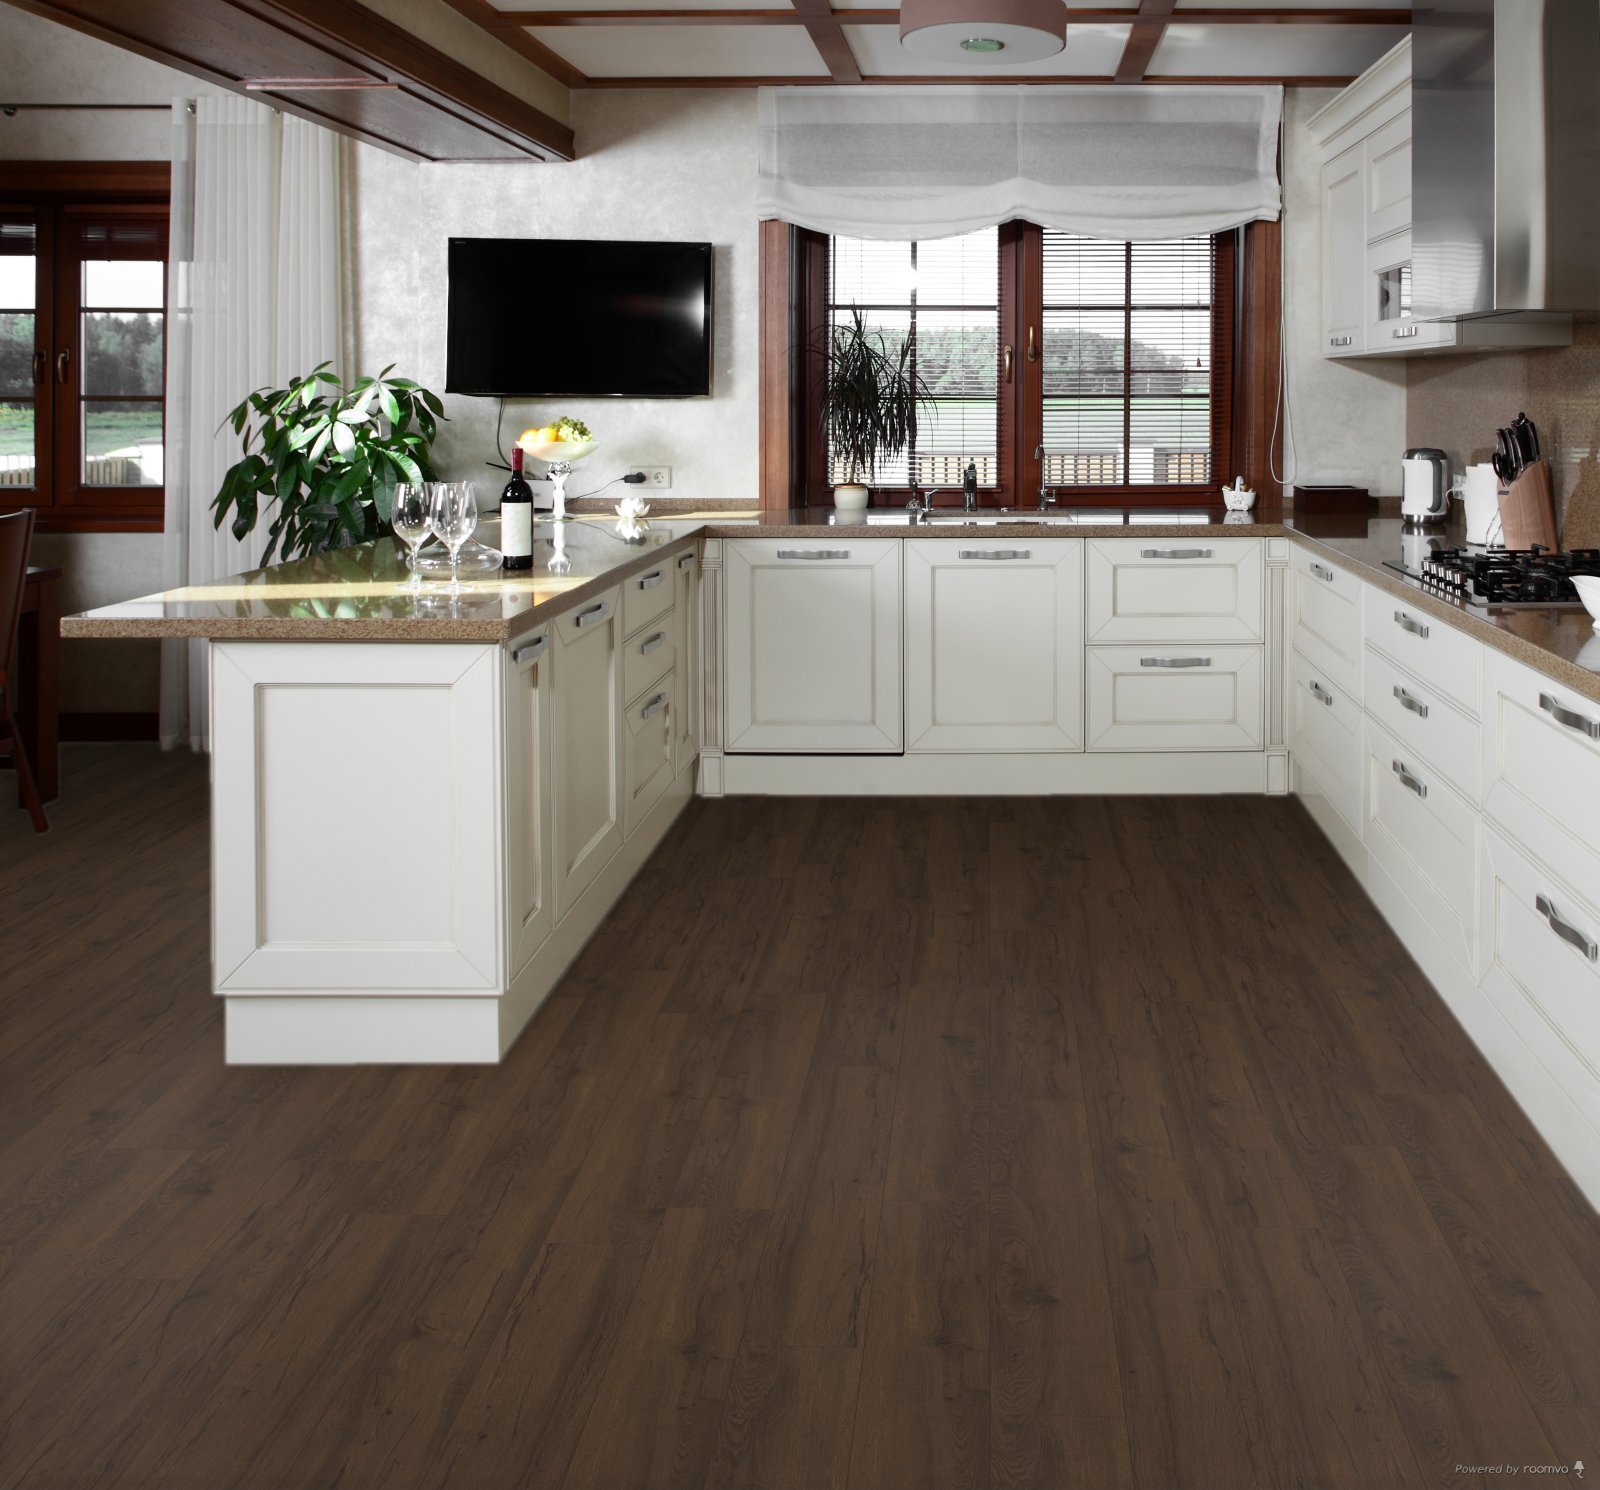 Horizen Flooring presents to you a picture of a quality wide plank Winchester luxury vinyl plank. NovoCore Premium EIR collection features a wide range of colors & designs that will compliment any interior. Natural wood grain synchronized surface allow for an authentic hardwood look & feel. This collection features a 0.25″ / 6.5 mm overall thickness and a durable 22 mil / 0.55 mm wear layer for residential and commercial applications.